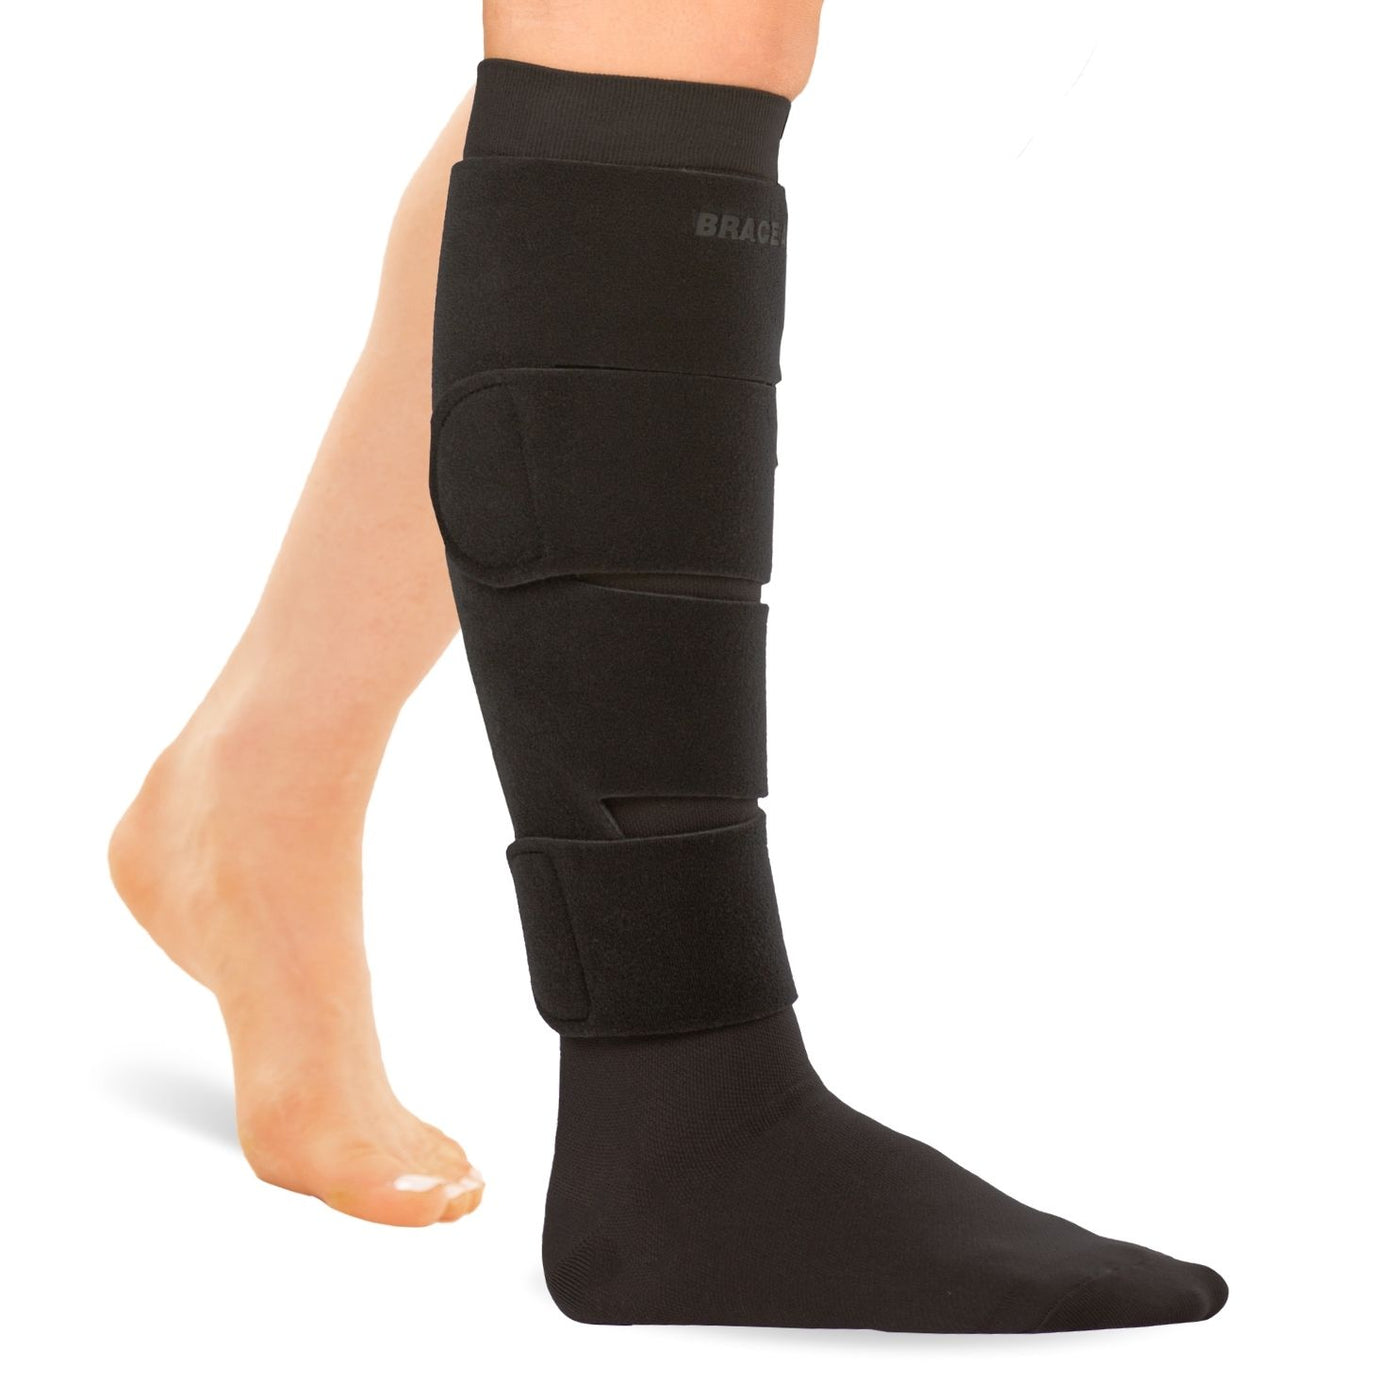 The BraceAbility lymphedema leg compress wrap is perfect for swelling in legs for at home remedies